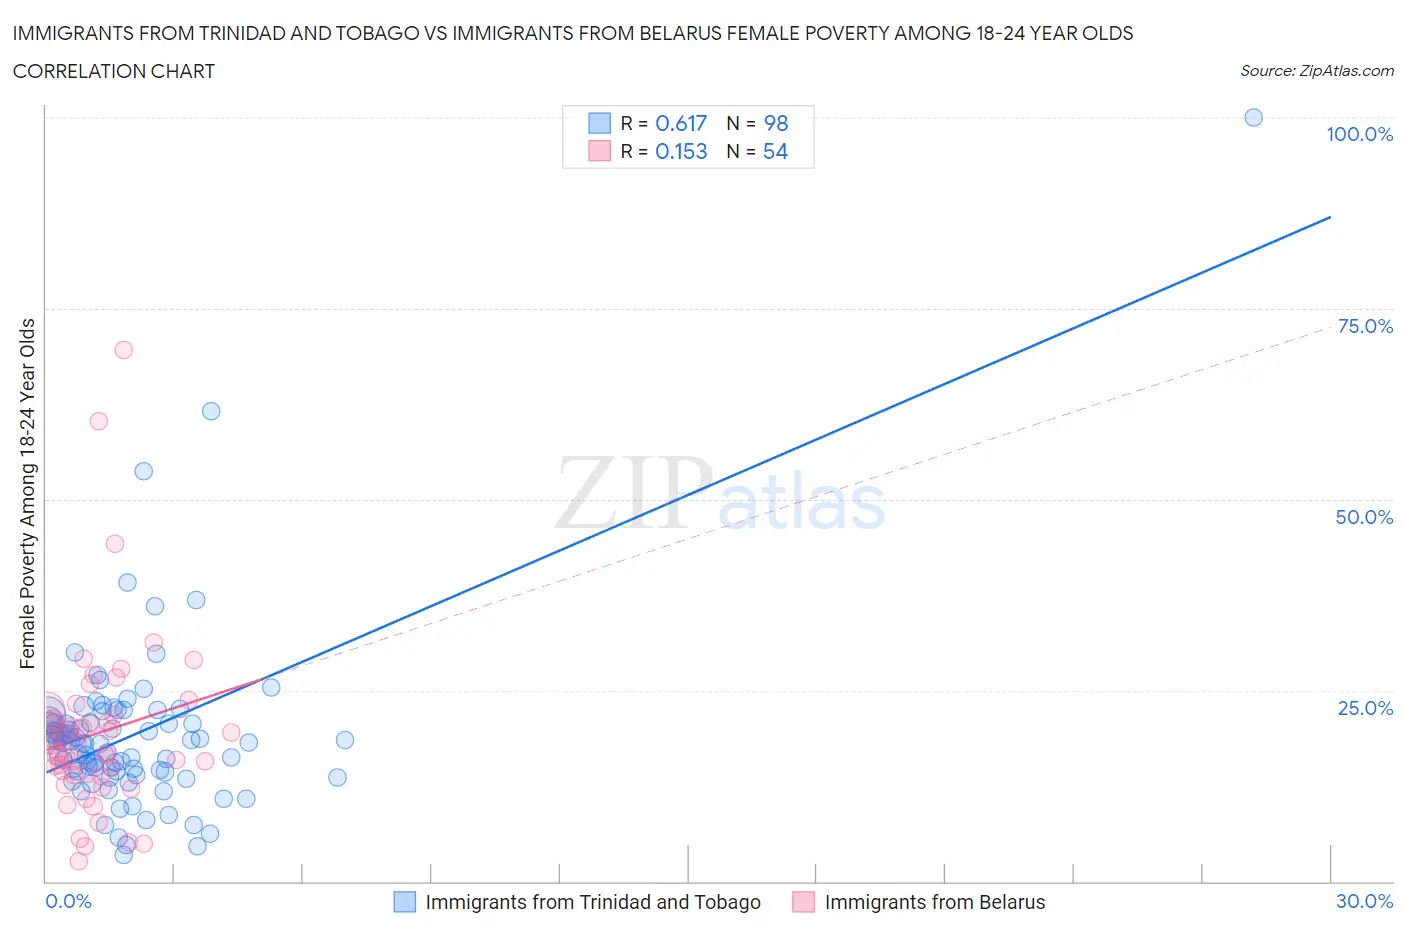 Immigrants from Trinidad and Tobago vs Immigrants from Belarus Female Poverty Among 18-24 Year Olds